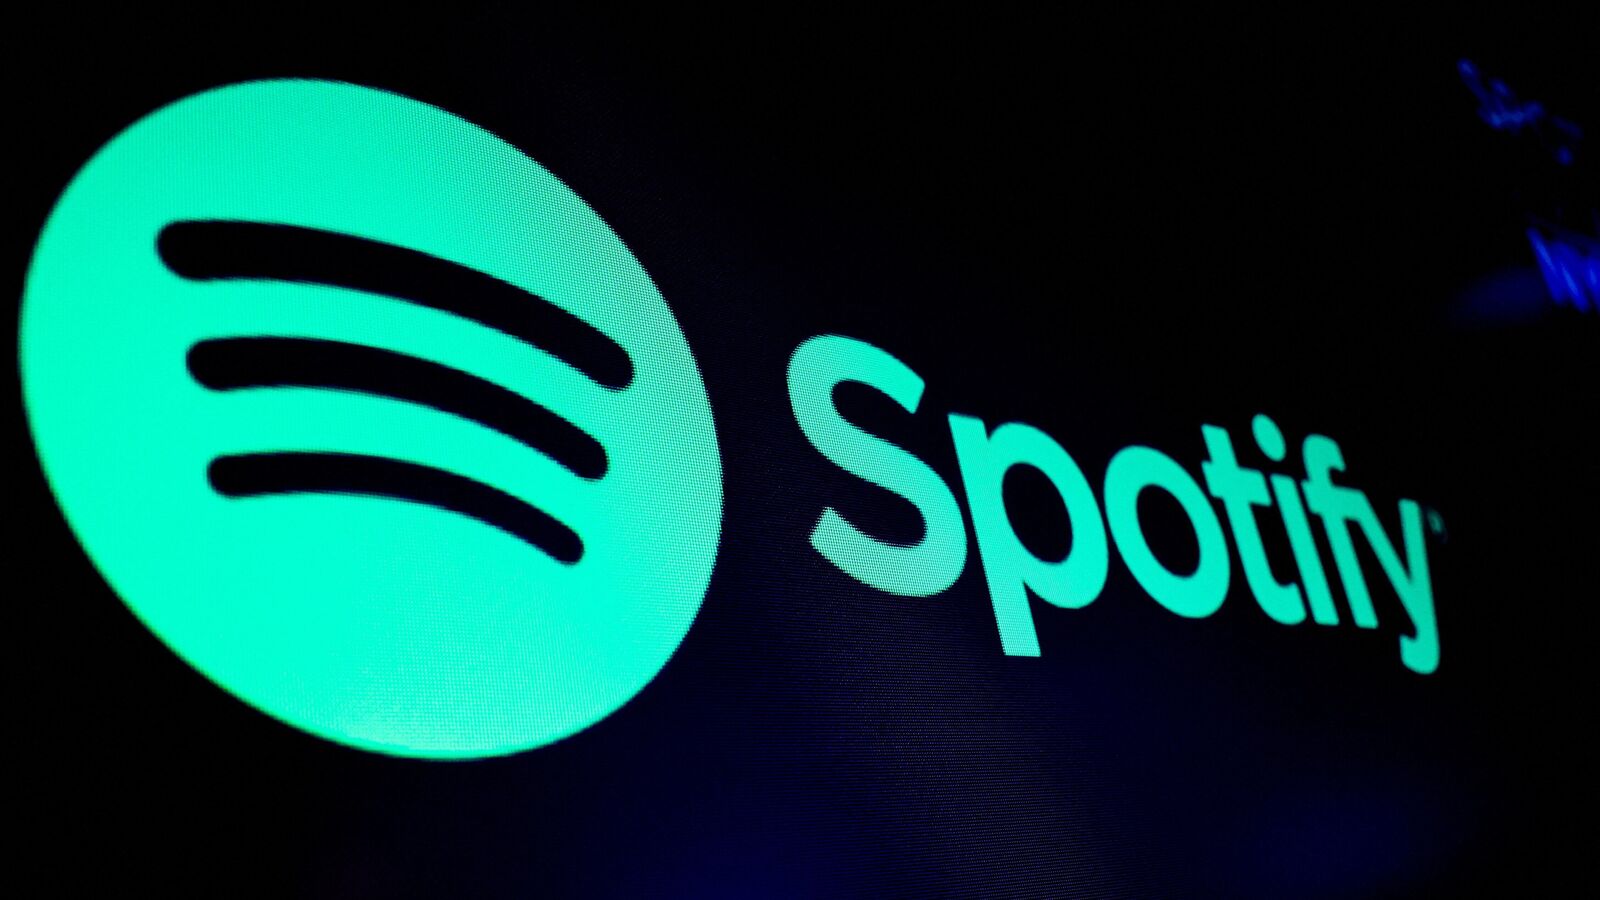 Apple's new EU App Store changes are 'vague and misleading', says Spotify CEO